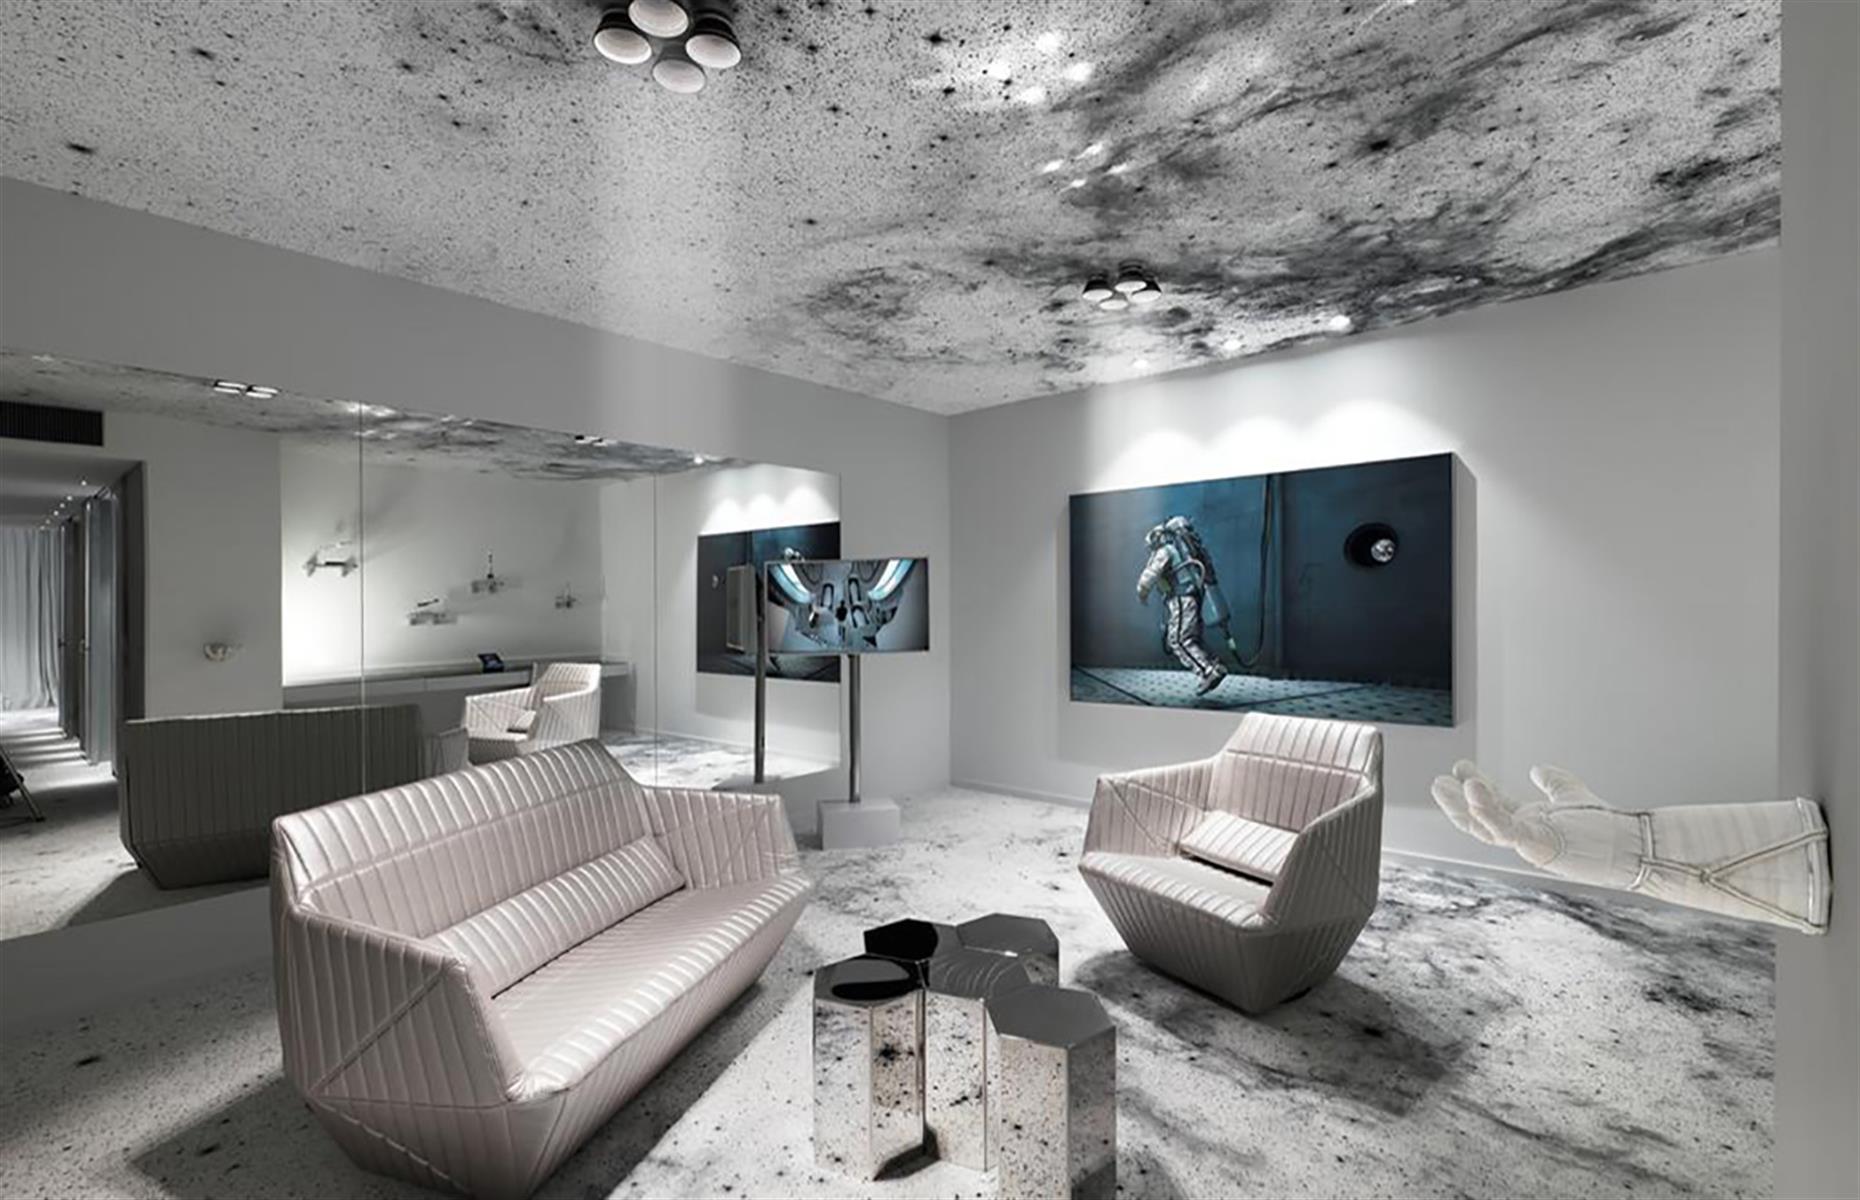 <p>One small step for a man, one giant leap for you to get to your bed in this spacious moon-themed executive suite at the <a href="http://www.booking.com/hotel/ch/kameha-grand-zurich-autograph-collection.en-gb.html" rel="nofollow” target=">Kameha Grand Zürich</a>. The floors and ceilings are made to look like the surface of the moon, while the furniture and dècor resembles that of a spaceship. It's all finished with paintings of astronauts and lamps that resemble the engines on a spaceship for you to step straight into what looks like a set for <em>Gravity</em> or <em>Interstellar</em>.</p>  <p><strong><a href="https://www.loveexploring.com/gallerylist/65474/awesome-filming-locations-you-can-visit">Take a look at stunning filming locations you can actually visit</a></strong></p>